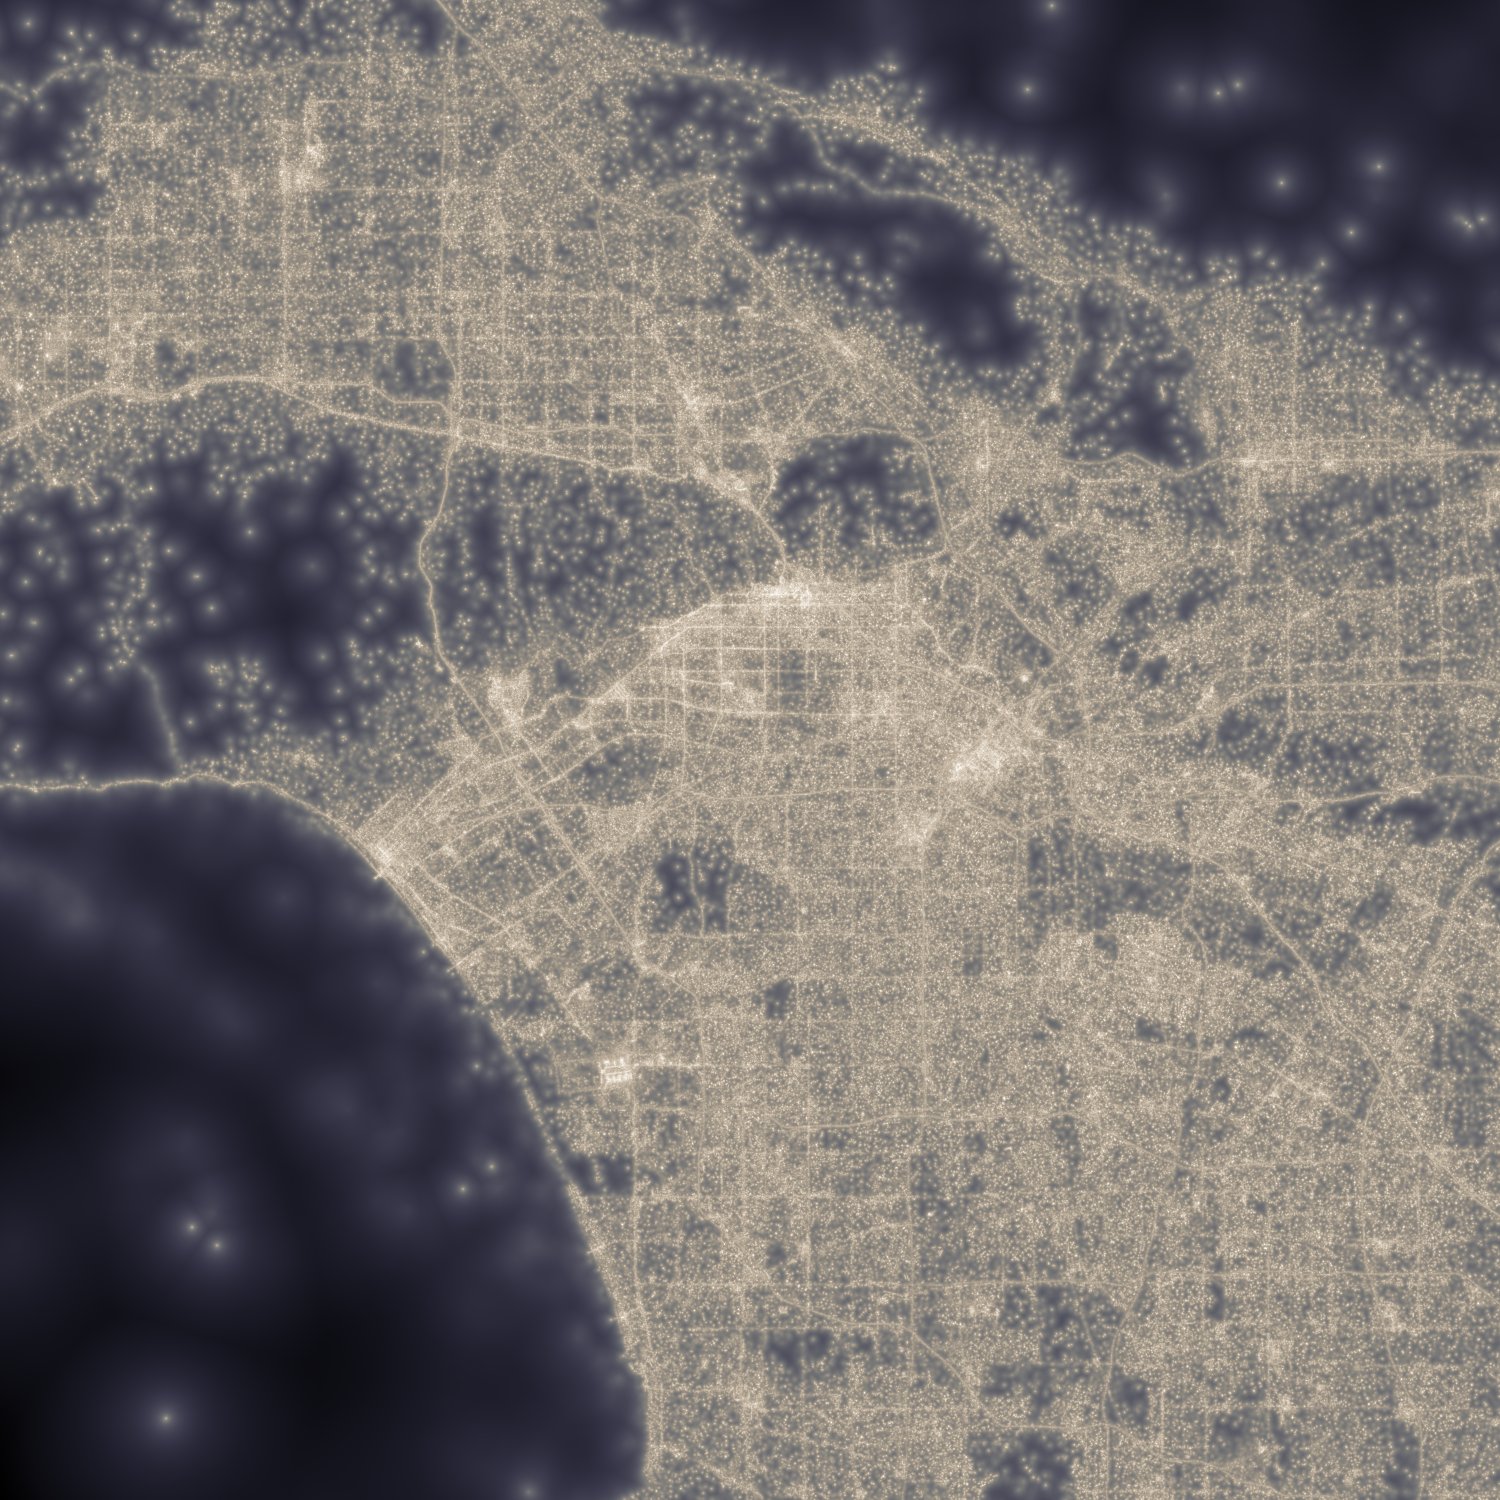 Los Angeles, California, Average Distance To 10 Nearest Tweets